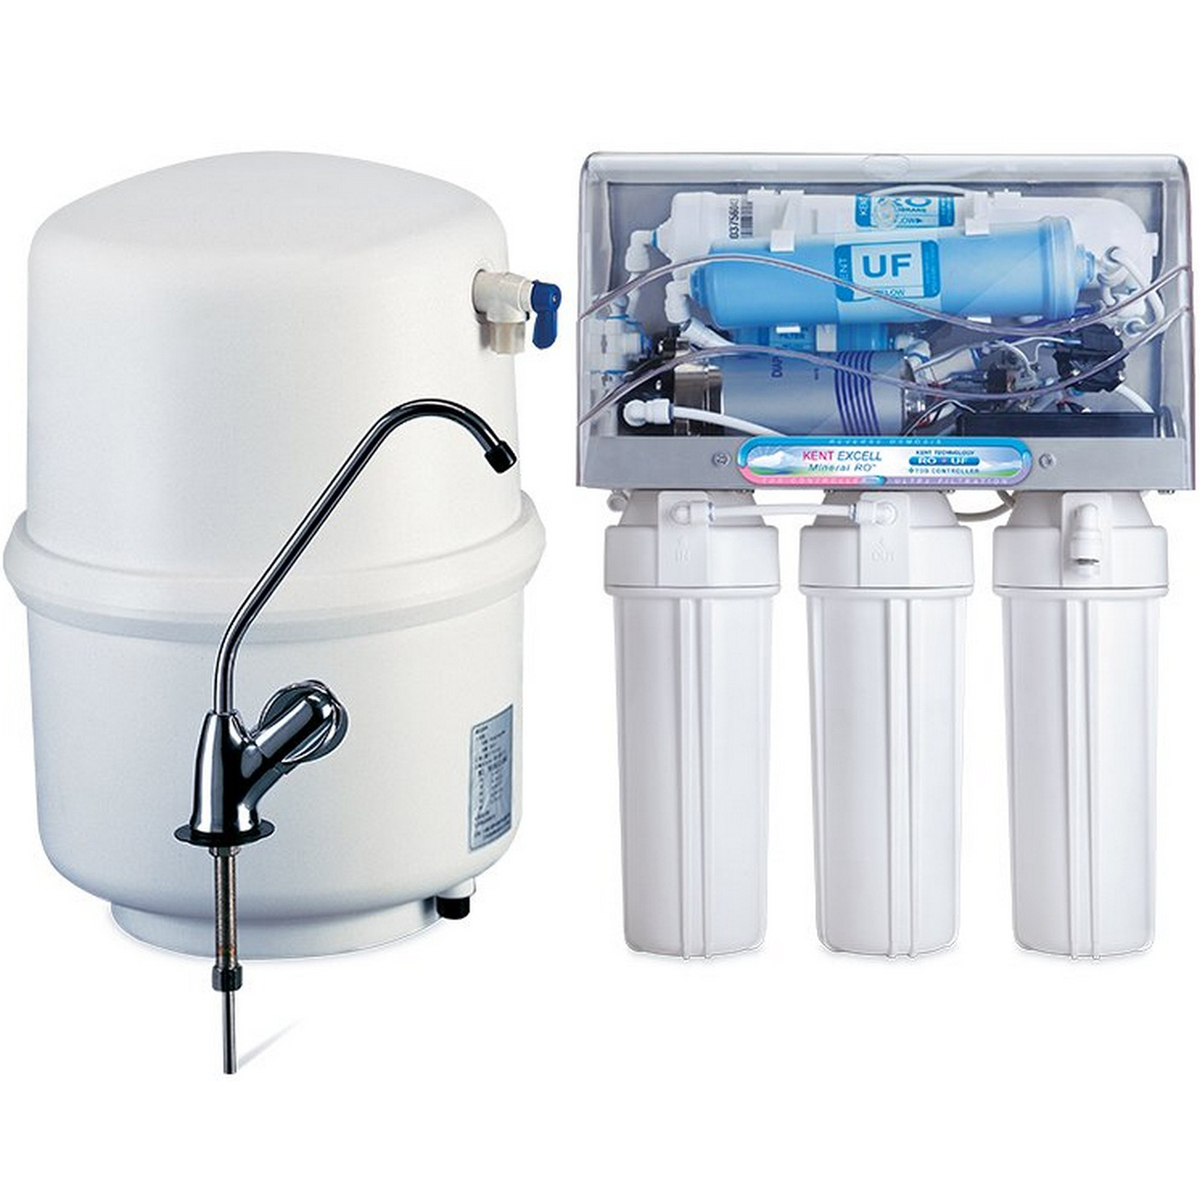 Kent Excell Mineral Ro Uv Uf Water Purifier With Tds Controller Online At Best Price Water Filters Acce Lulu Ksa